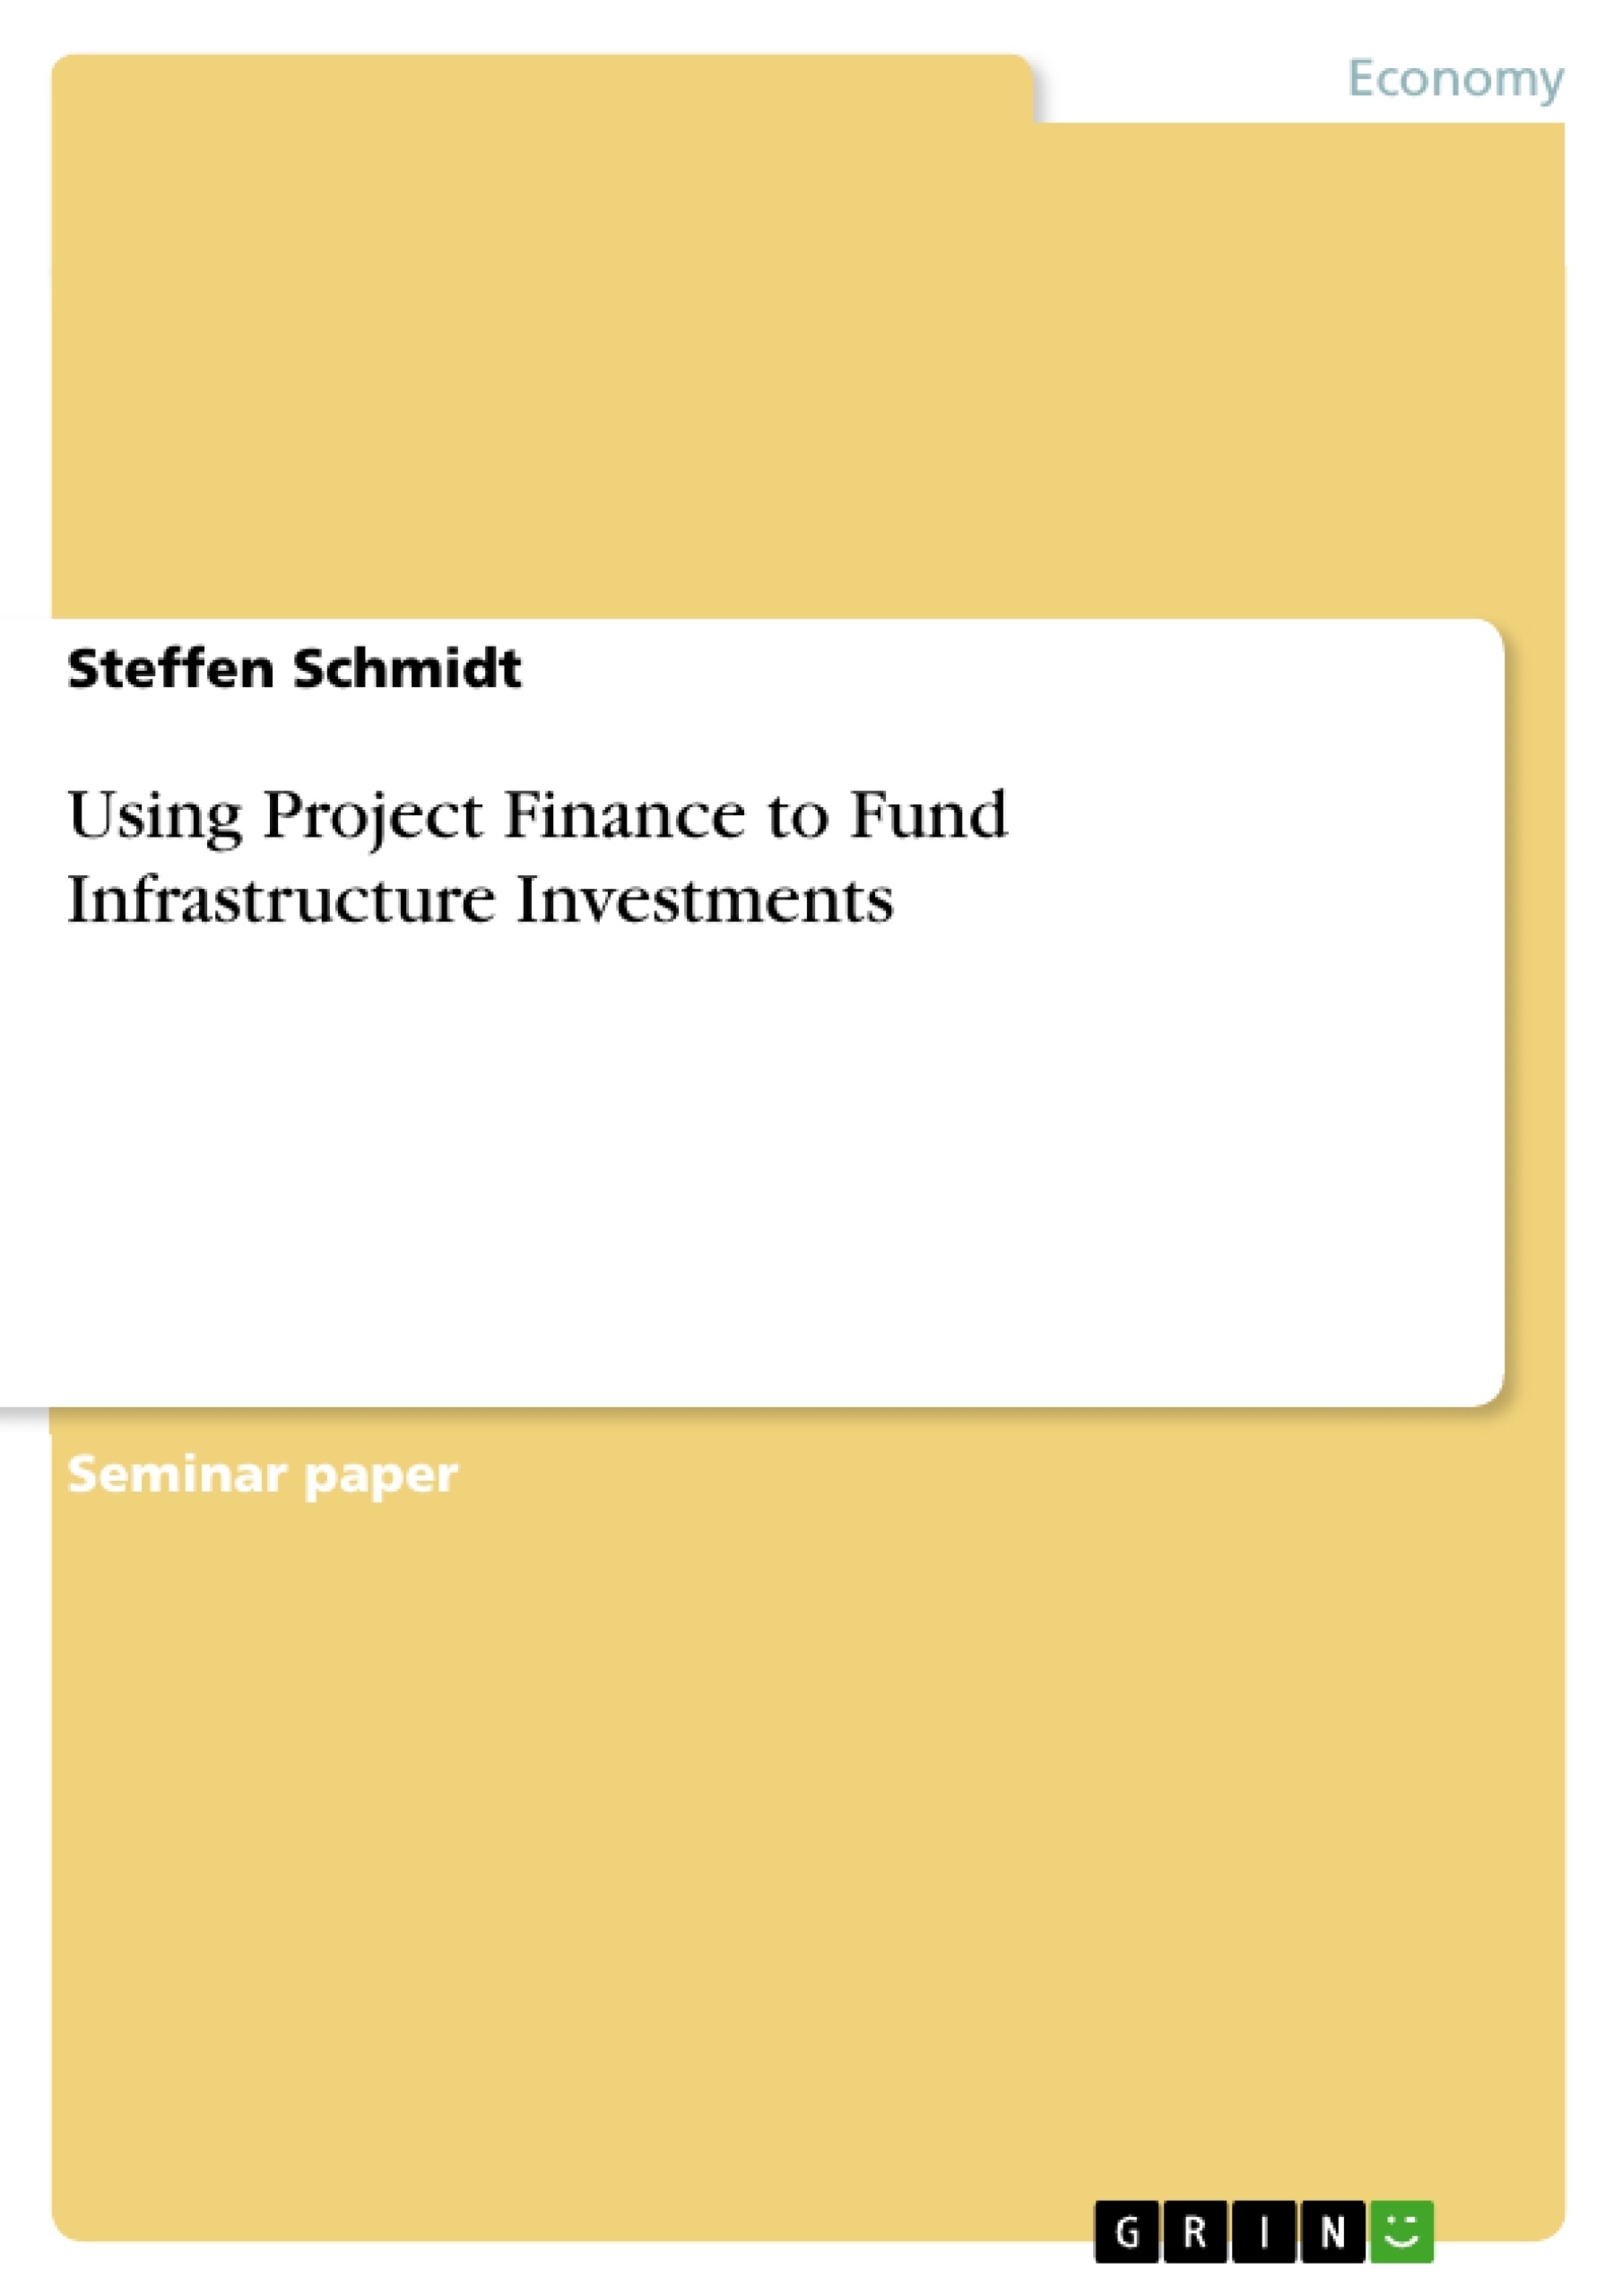 Title: Using Project Finance to Fund Infrastructure Investments